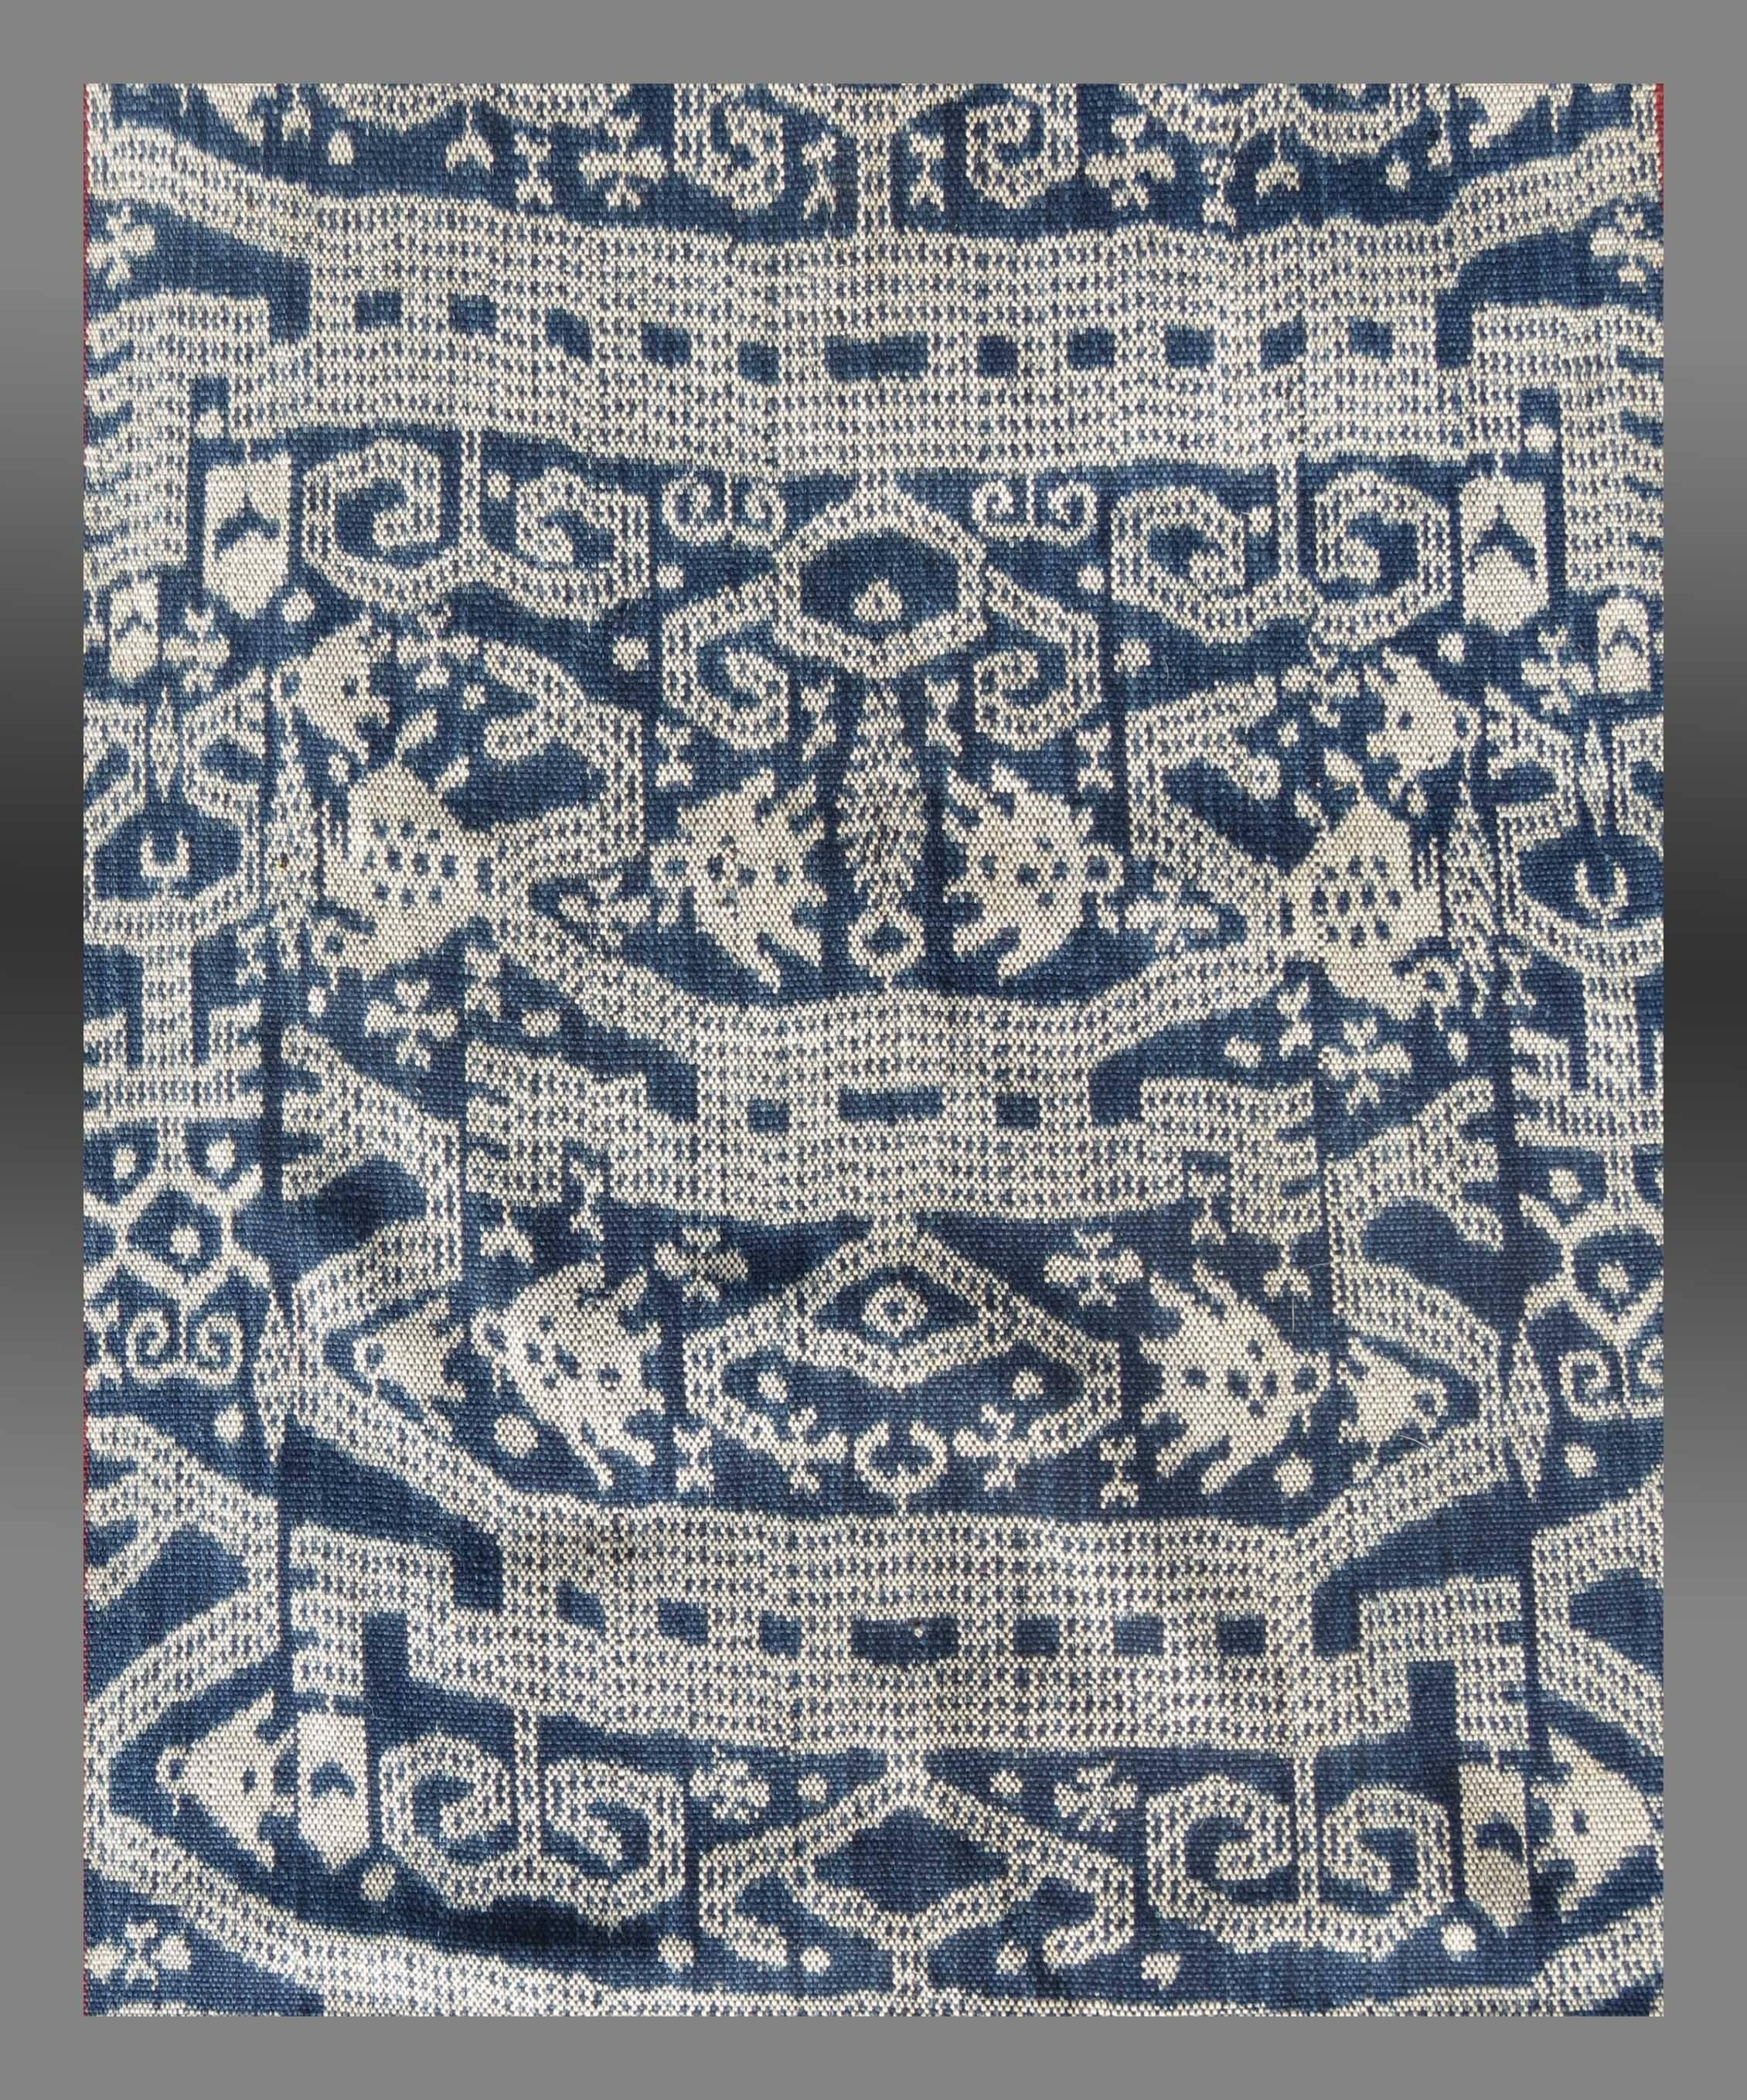 Timorese West Timor Tribal Cotton Ikat Textile, Decorative/Unusual, 1960s-1970s